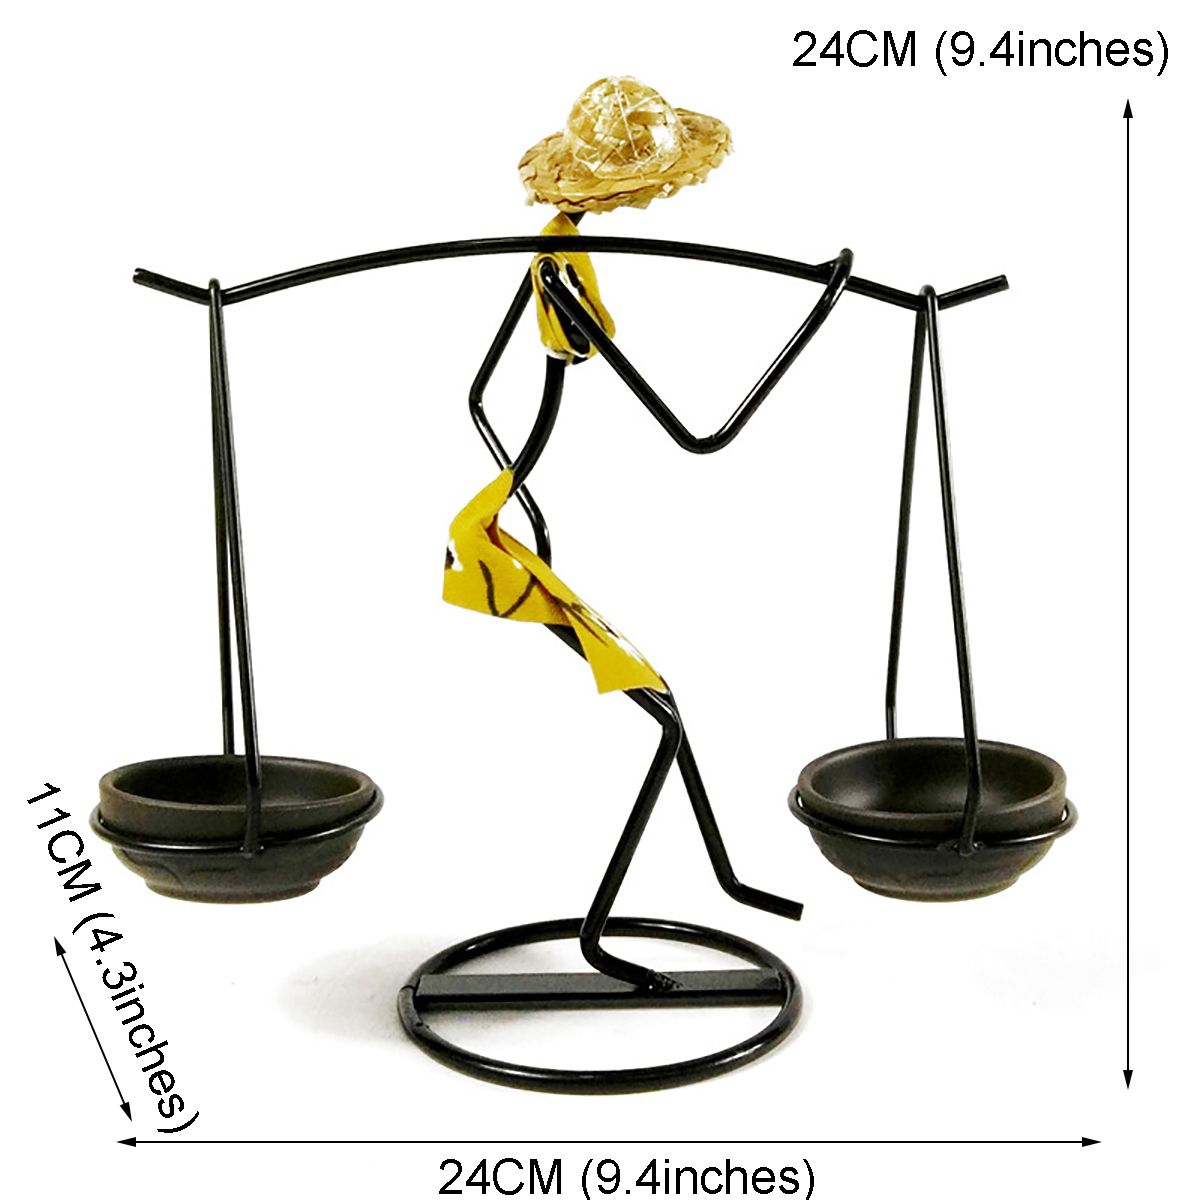 Nordic-Metal-Candlestick-Abstract-Character-Sculpture-Candle-Holder-Decorations-1647570